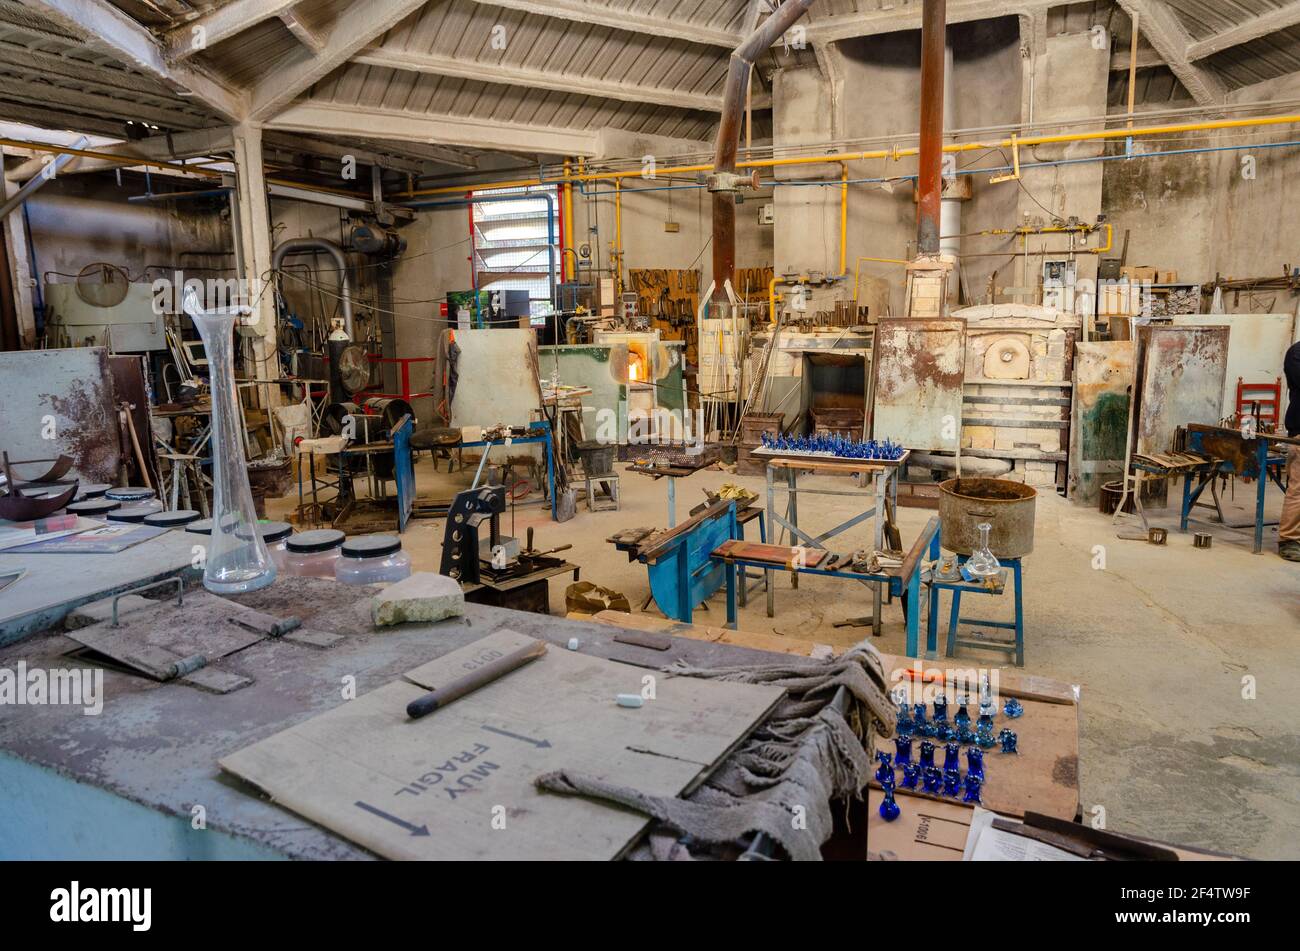 Interior of the glass workshop forgery with it's tools, large ovens, glass figures butane gas bottles, shelves, air dryers, boxes in Poble Espanyol. Stock Photo